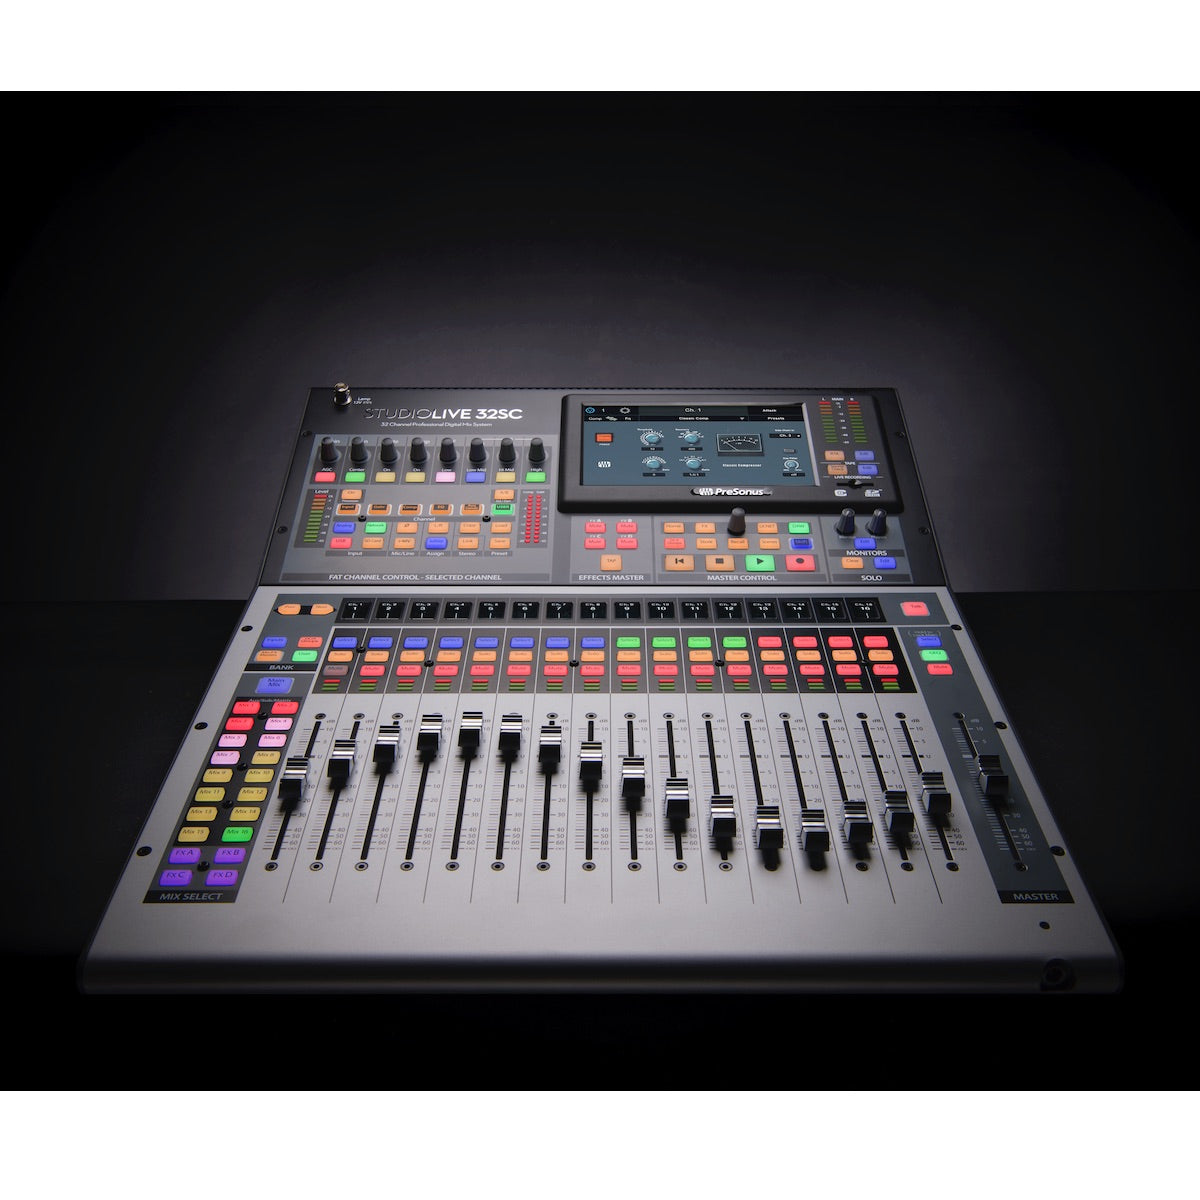 PreSonus StudioLive 32SC - Subcompact 32-channel Digital Mixer with Effects, hero image